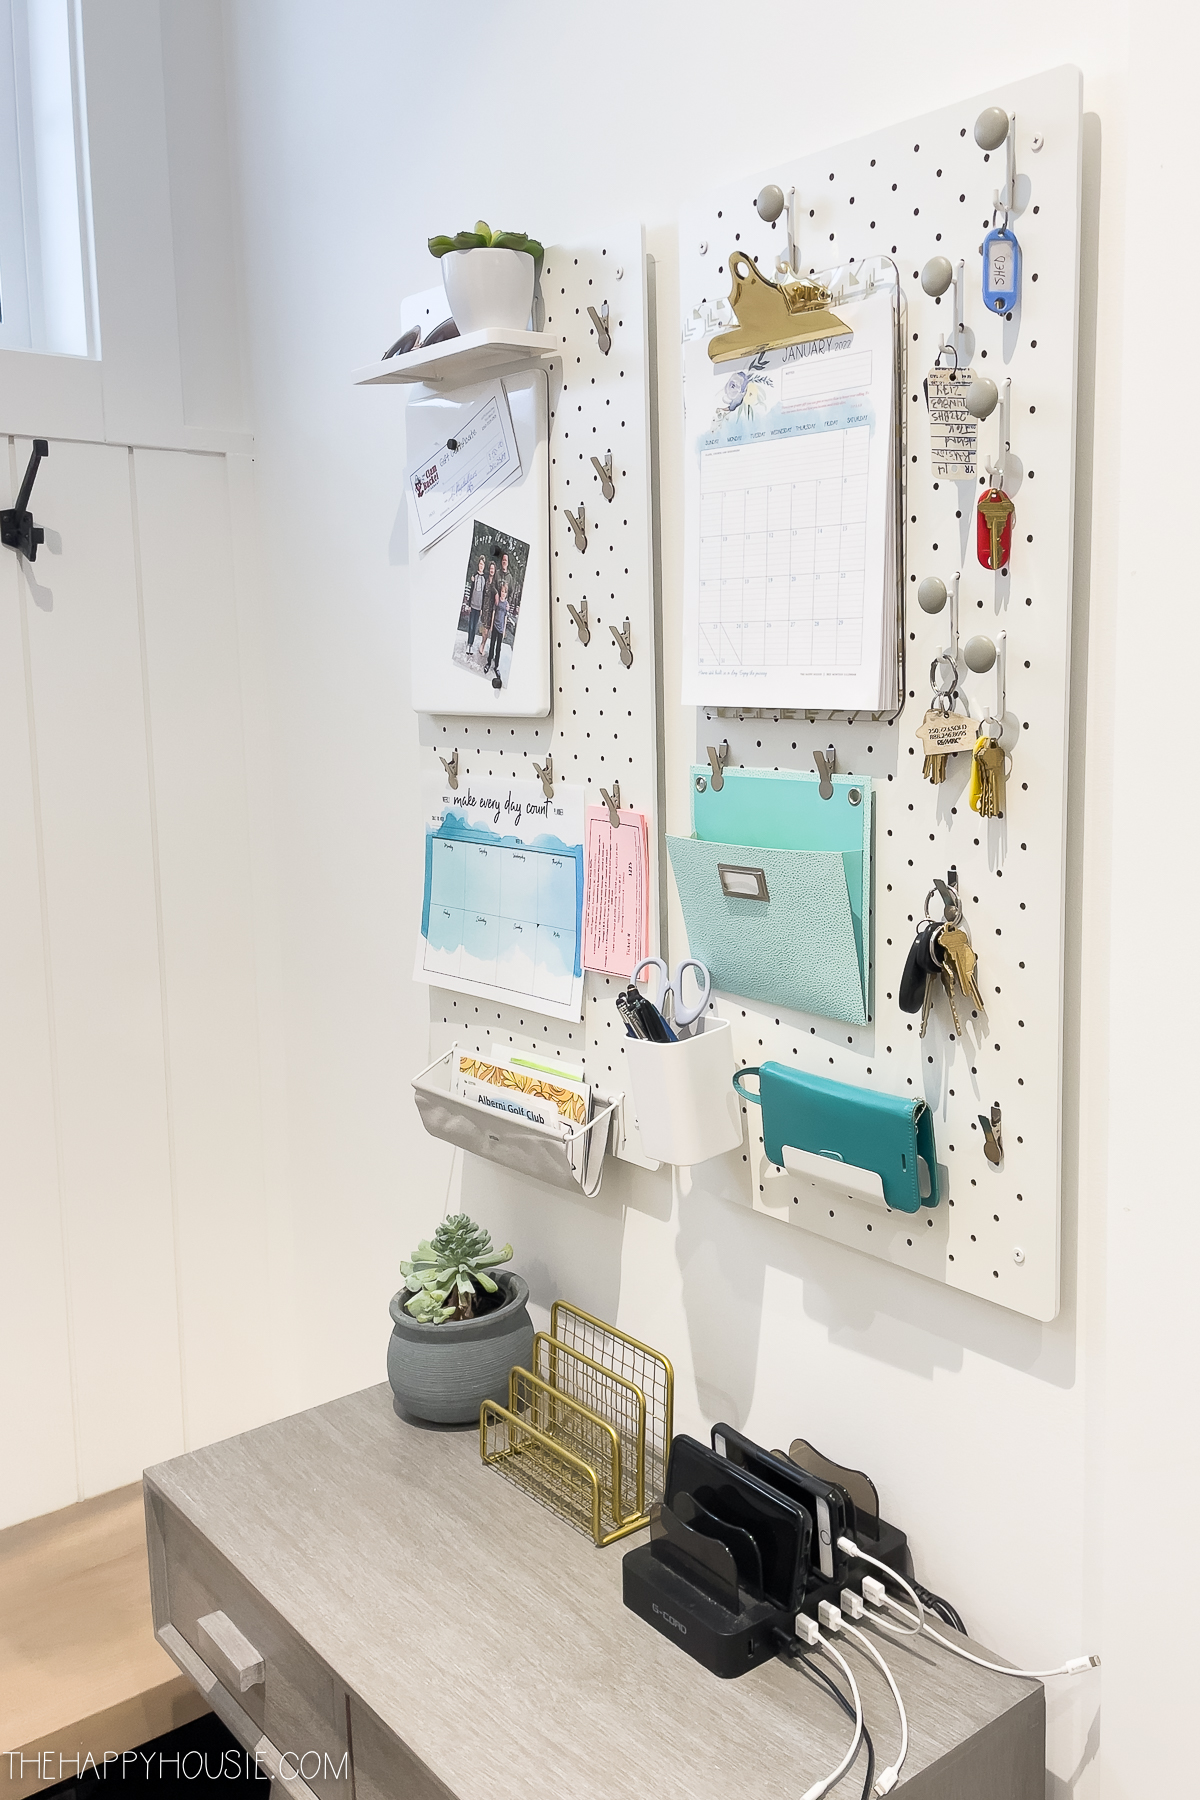 Pegboard wall organizers setup to help keep your family organized.